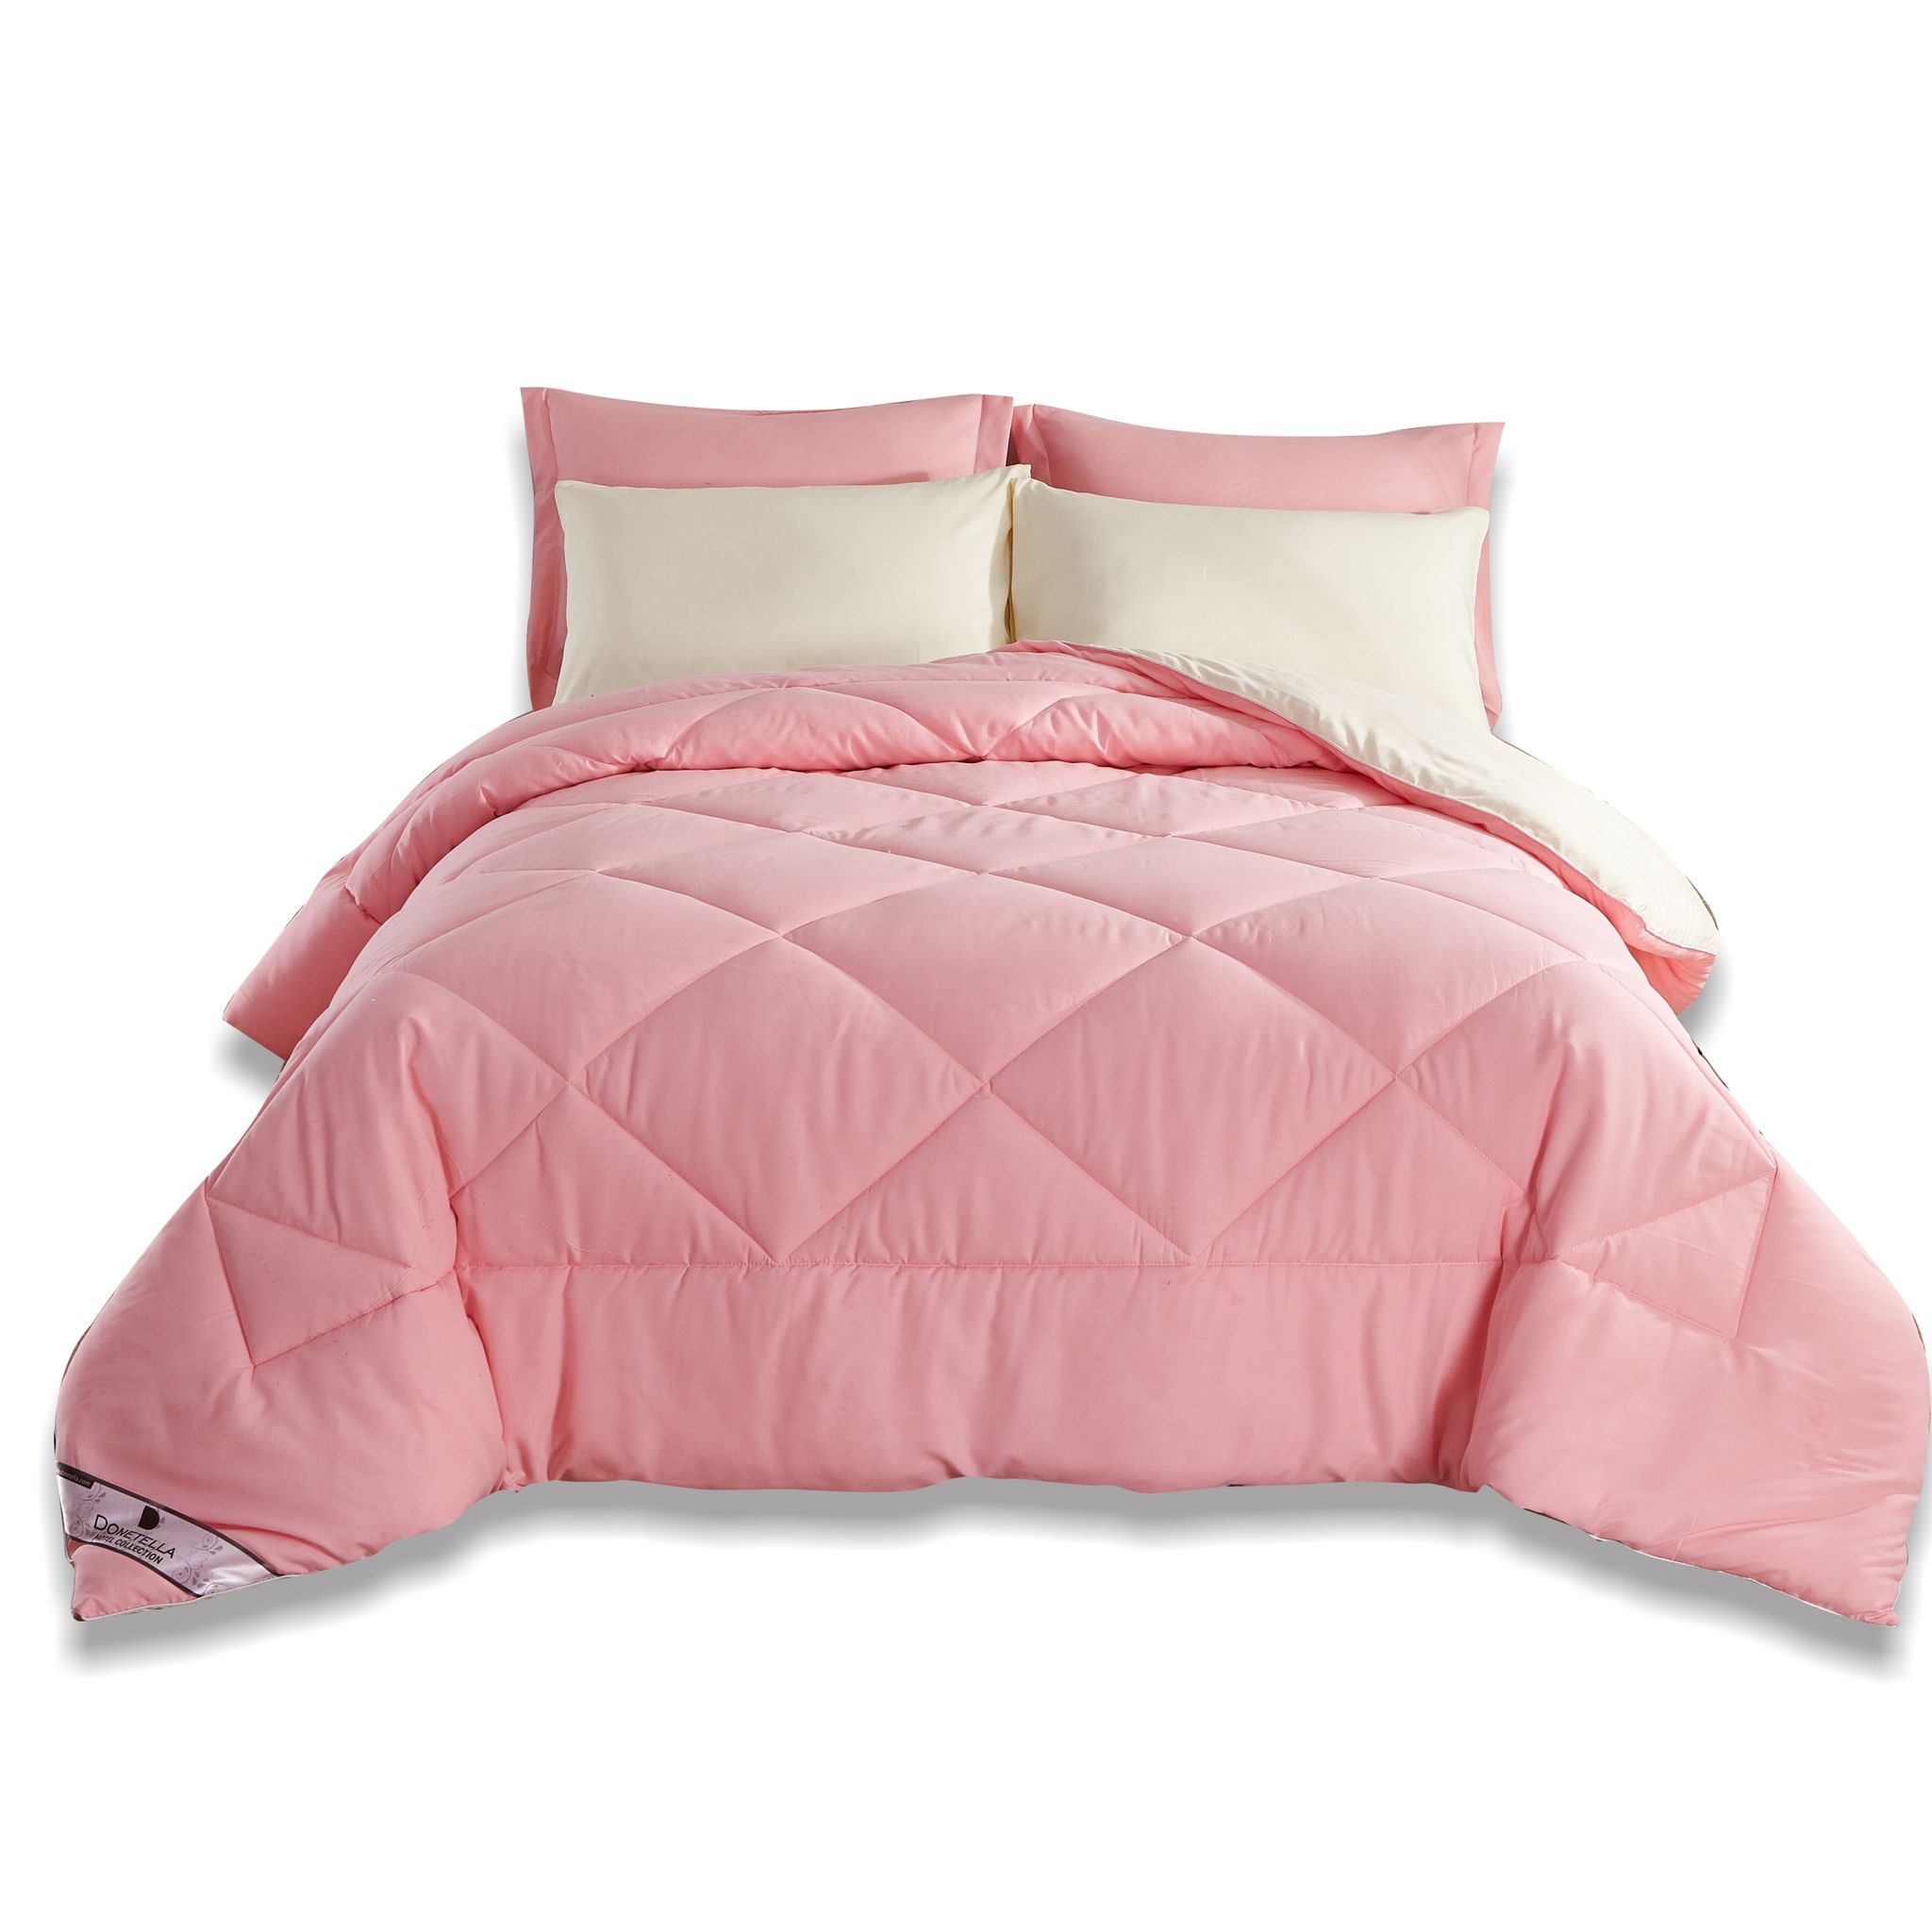 Diamond Quilted Reversible Comforter Set 6-Piece King Pink/Ivory